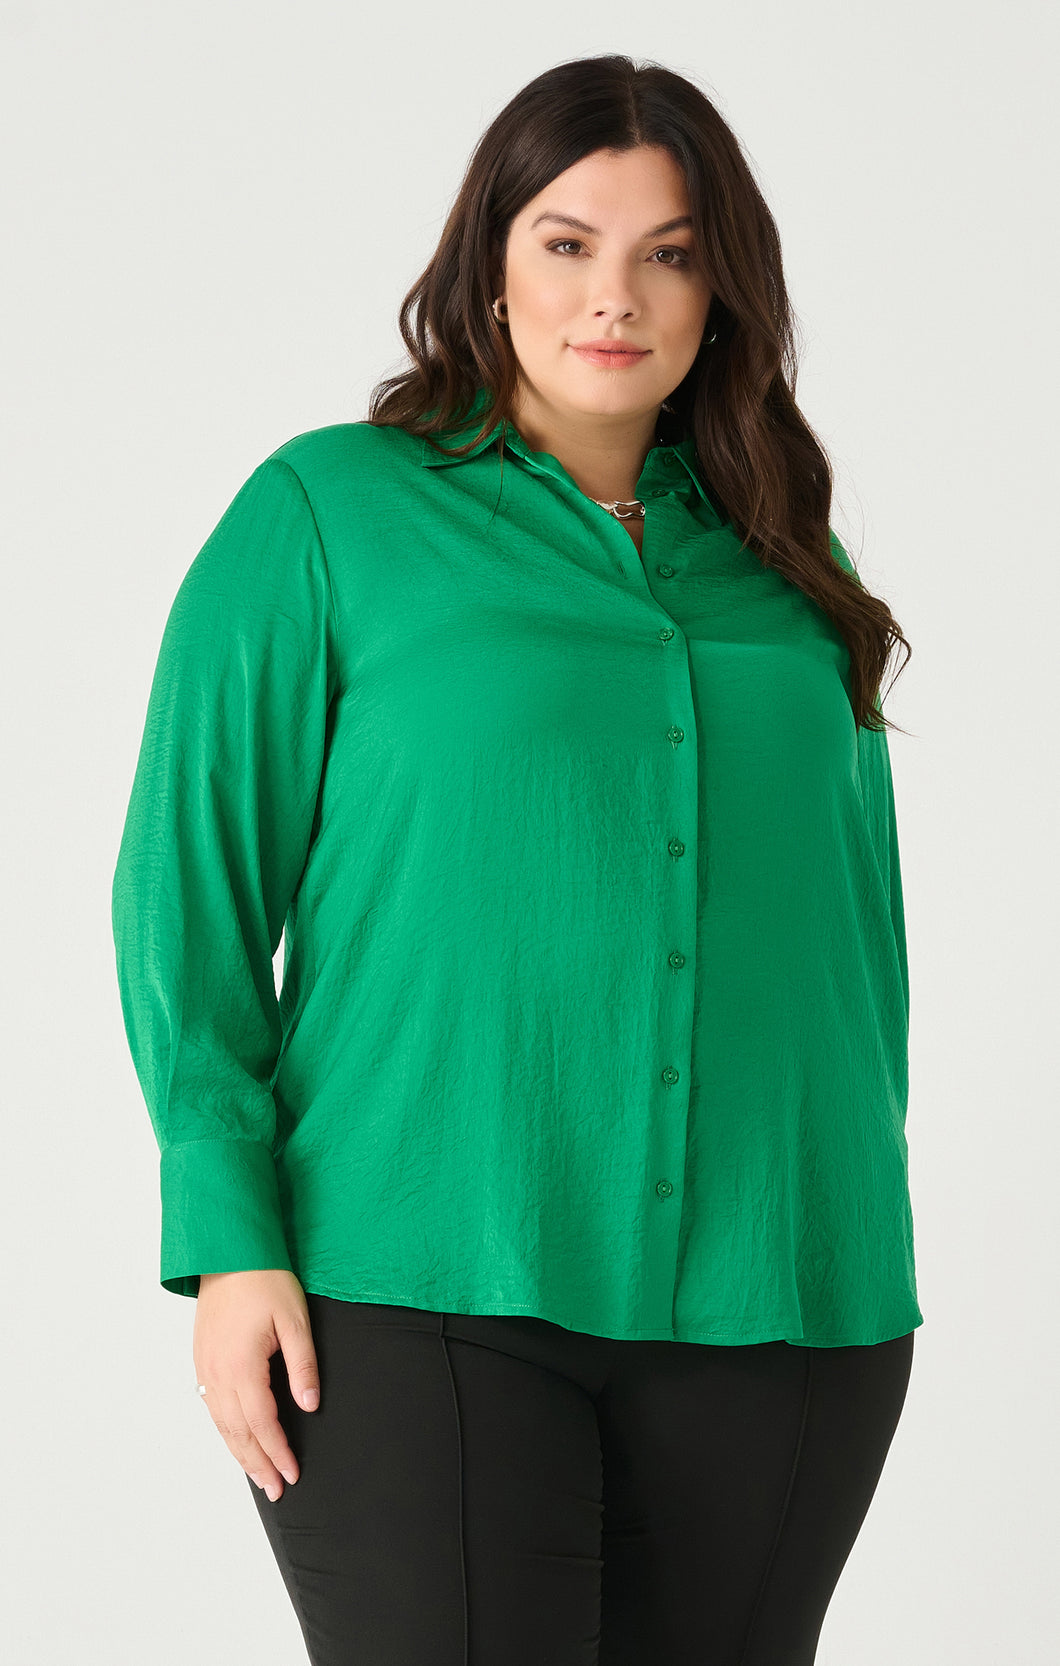 TEXTURED EMERALD BLOUSE by Dex (available in plus sizes)